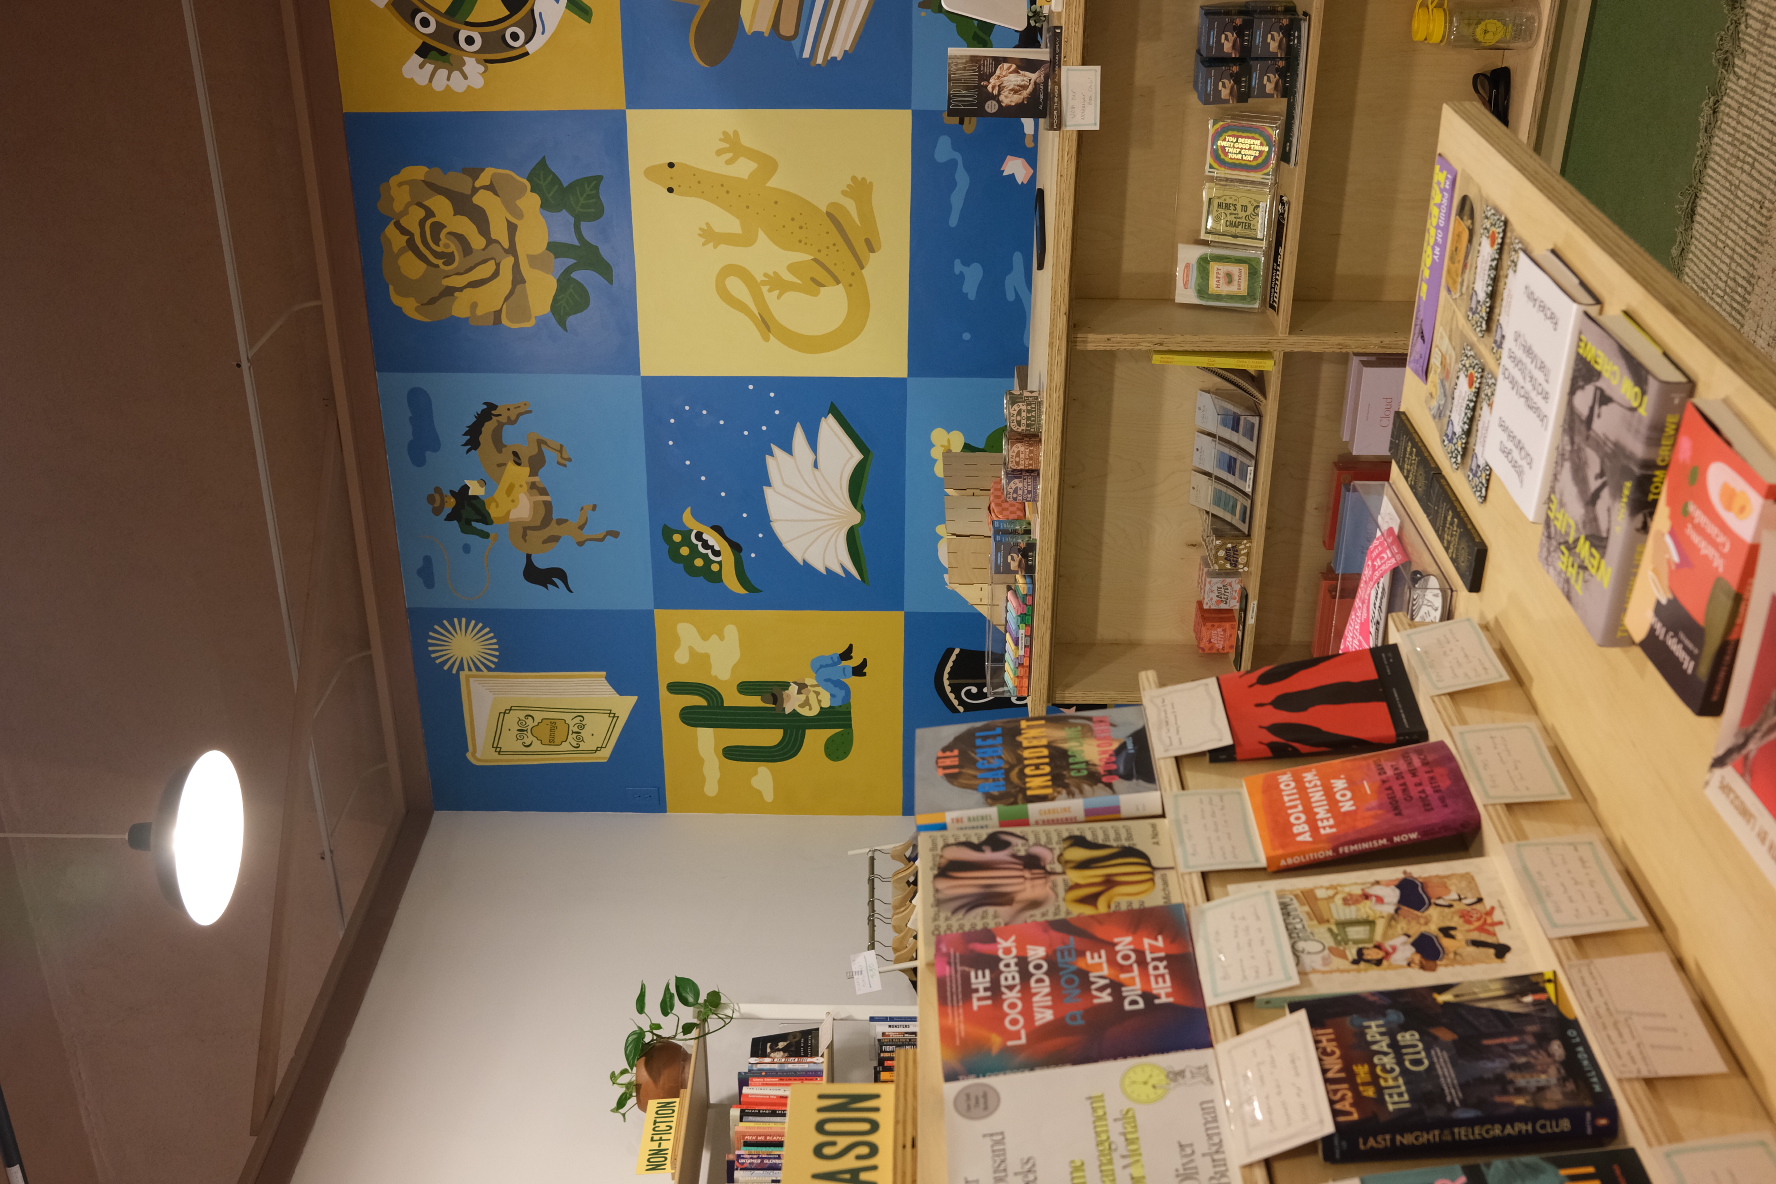 A table full of books sits in front of blue and yellow mural.